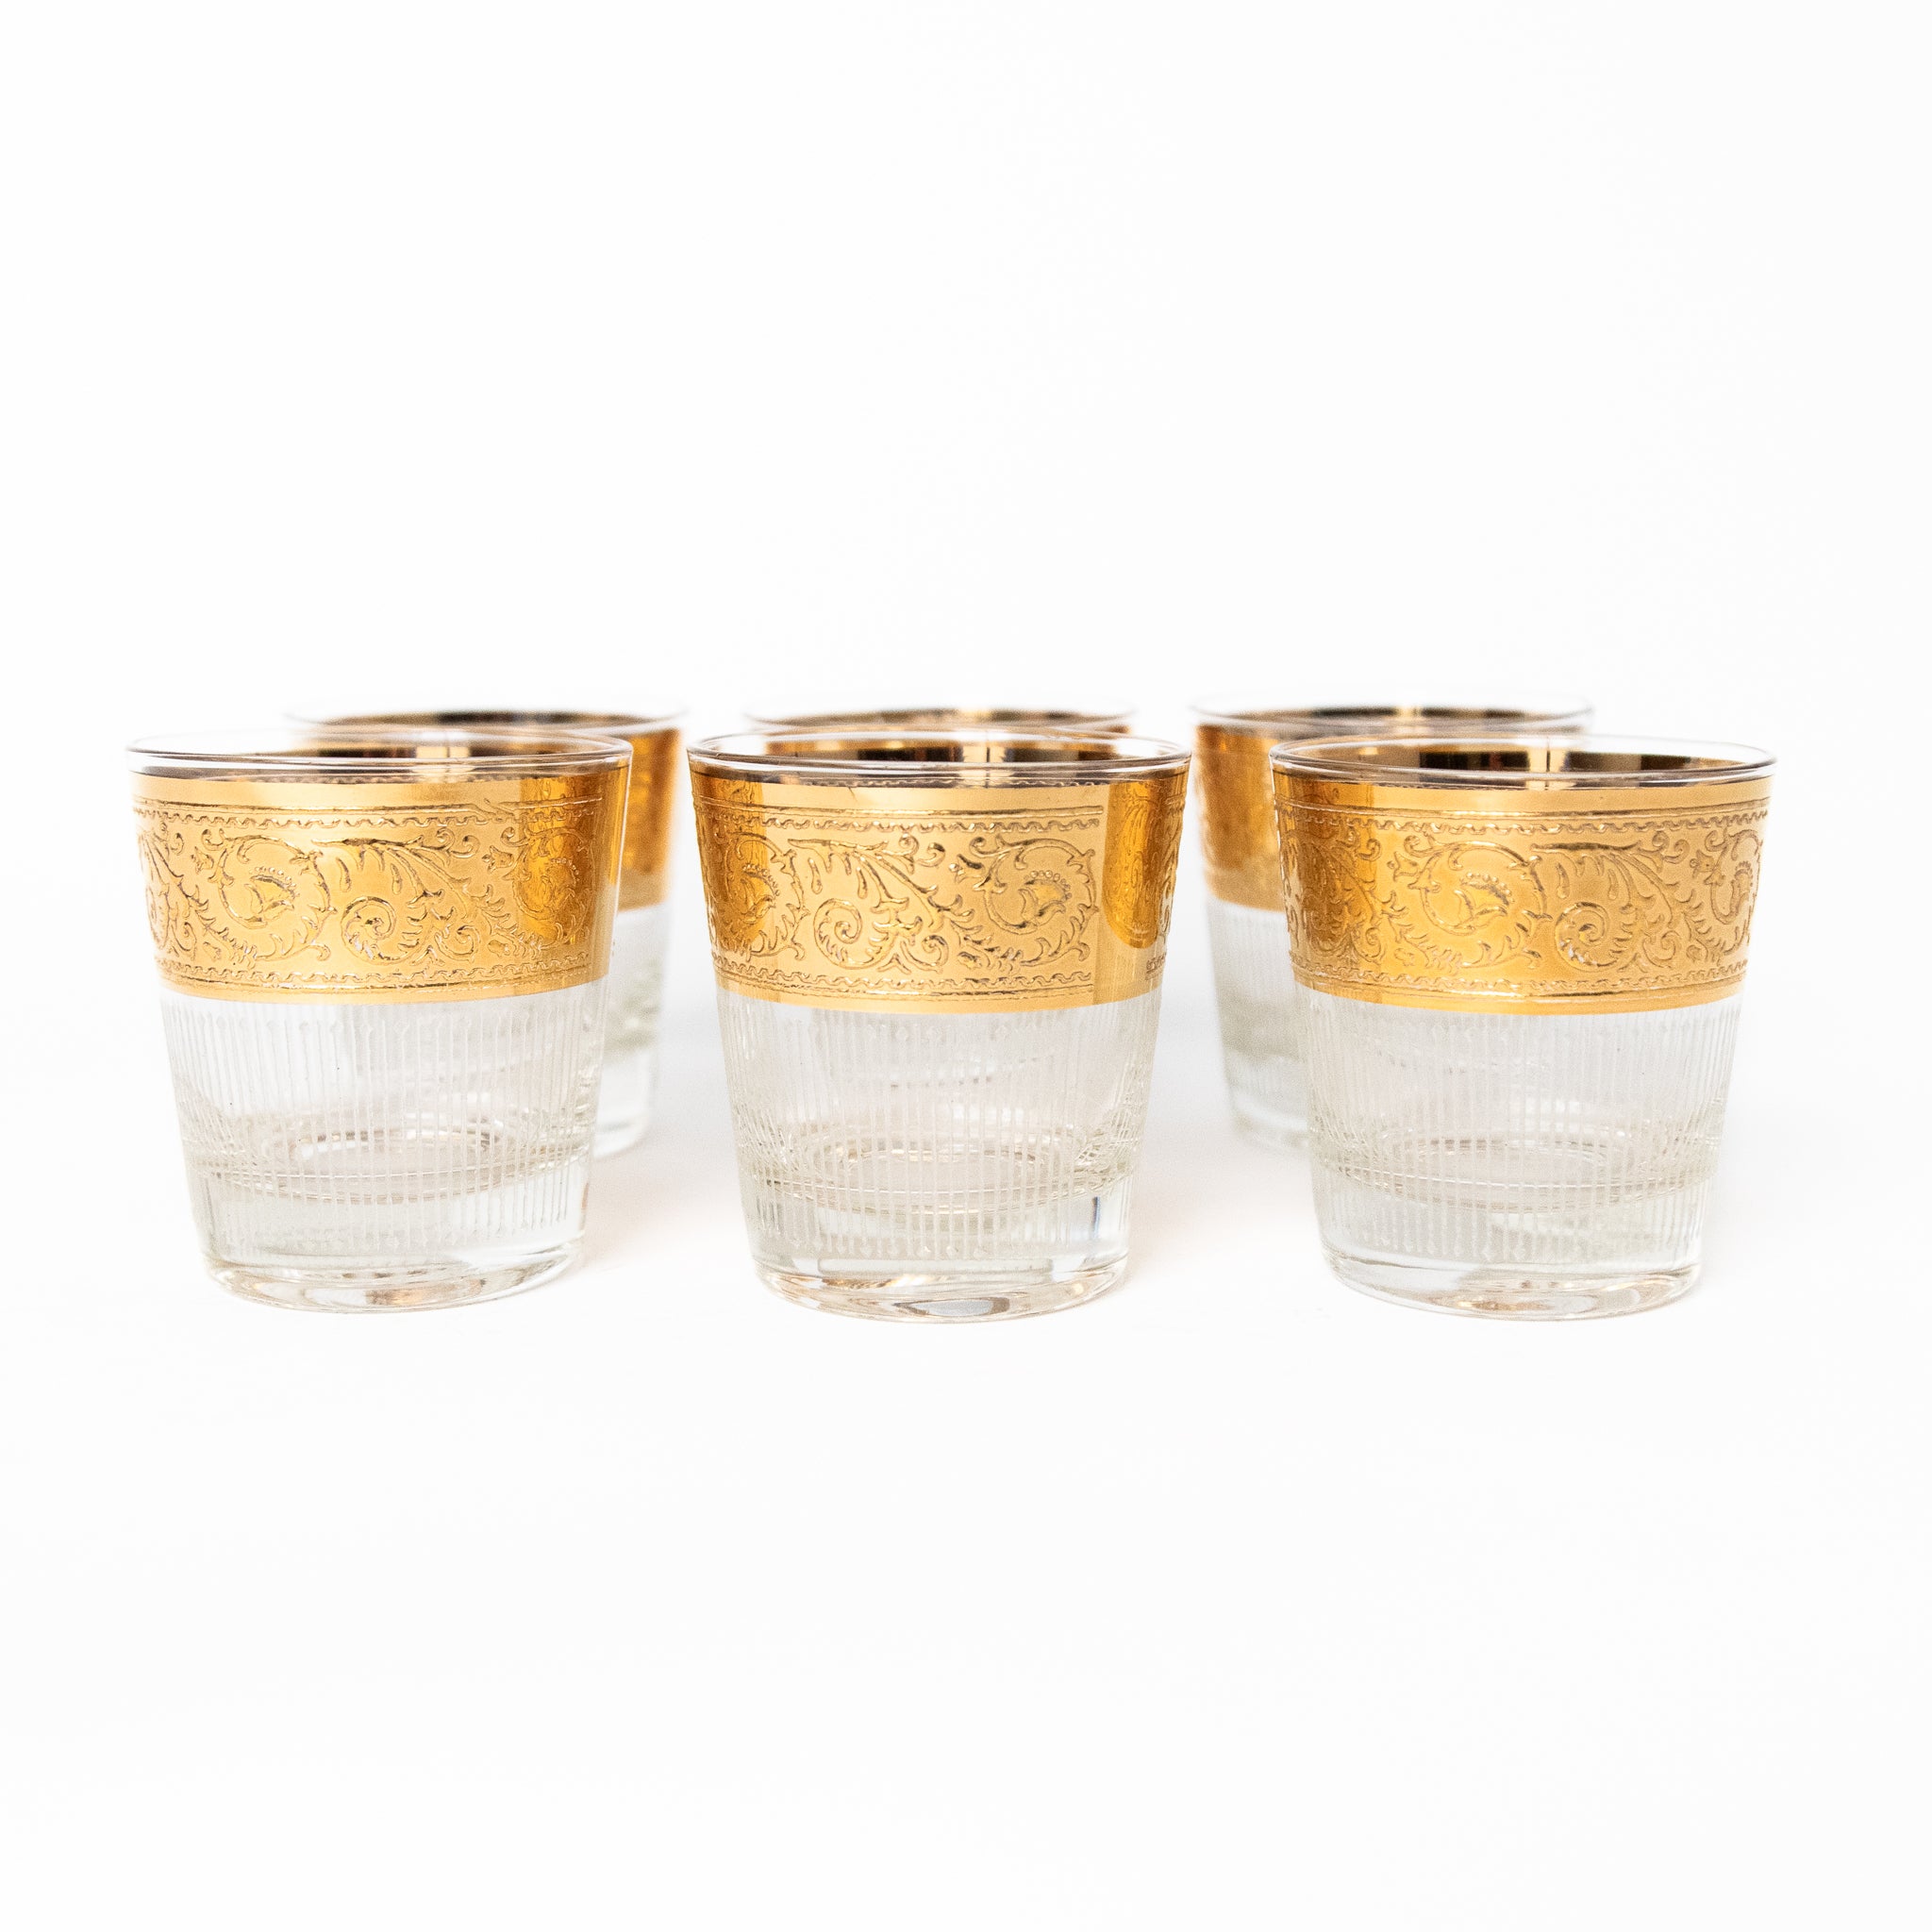 SET OF SIX 22K GOLD LOWBALL COCKTAIL GLASSES BY CULVER